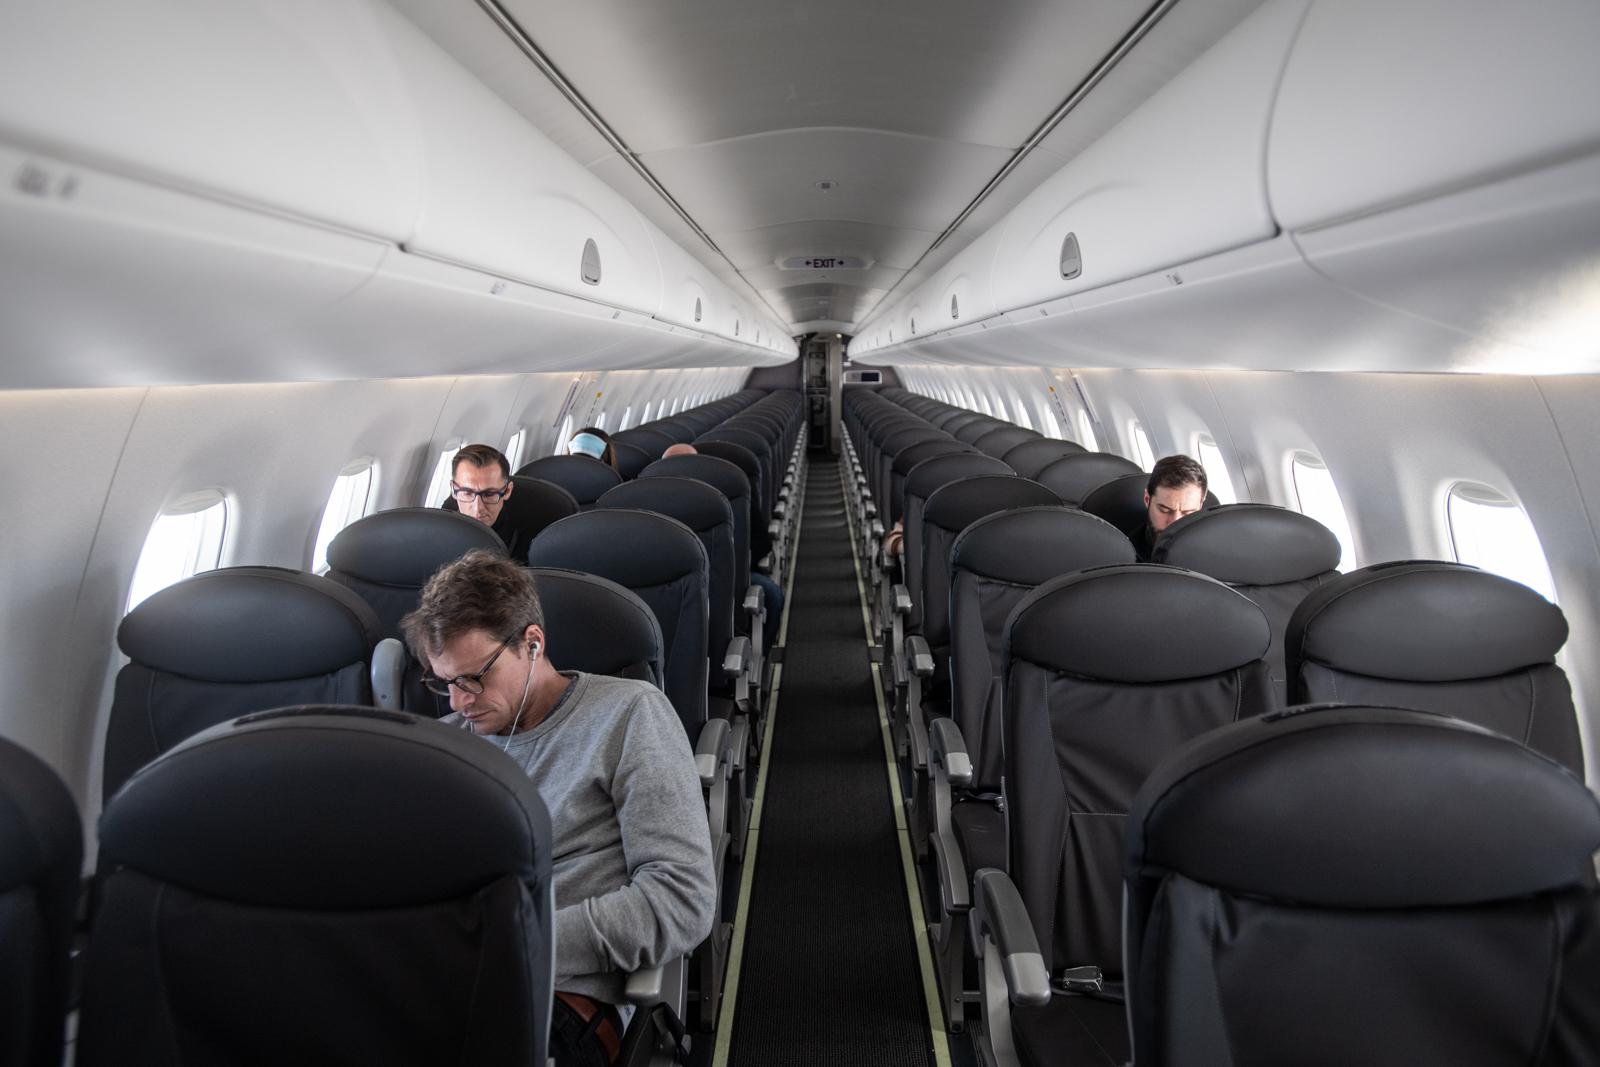 A handful of people seated in a nearly empty airplane cabin.